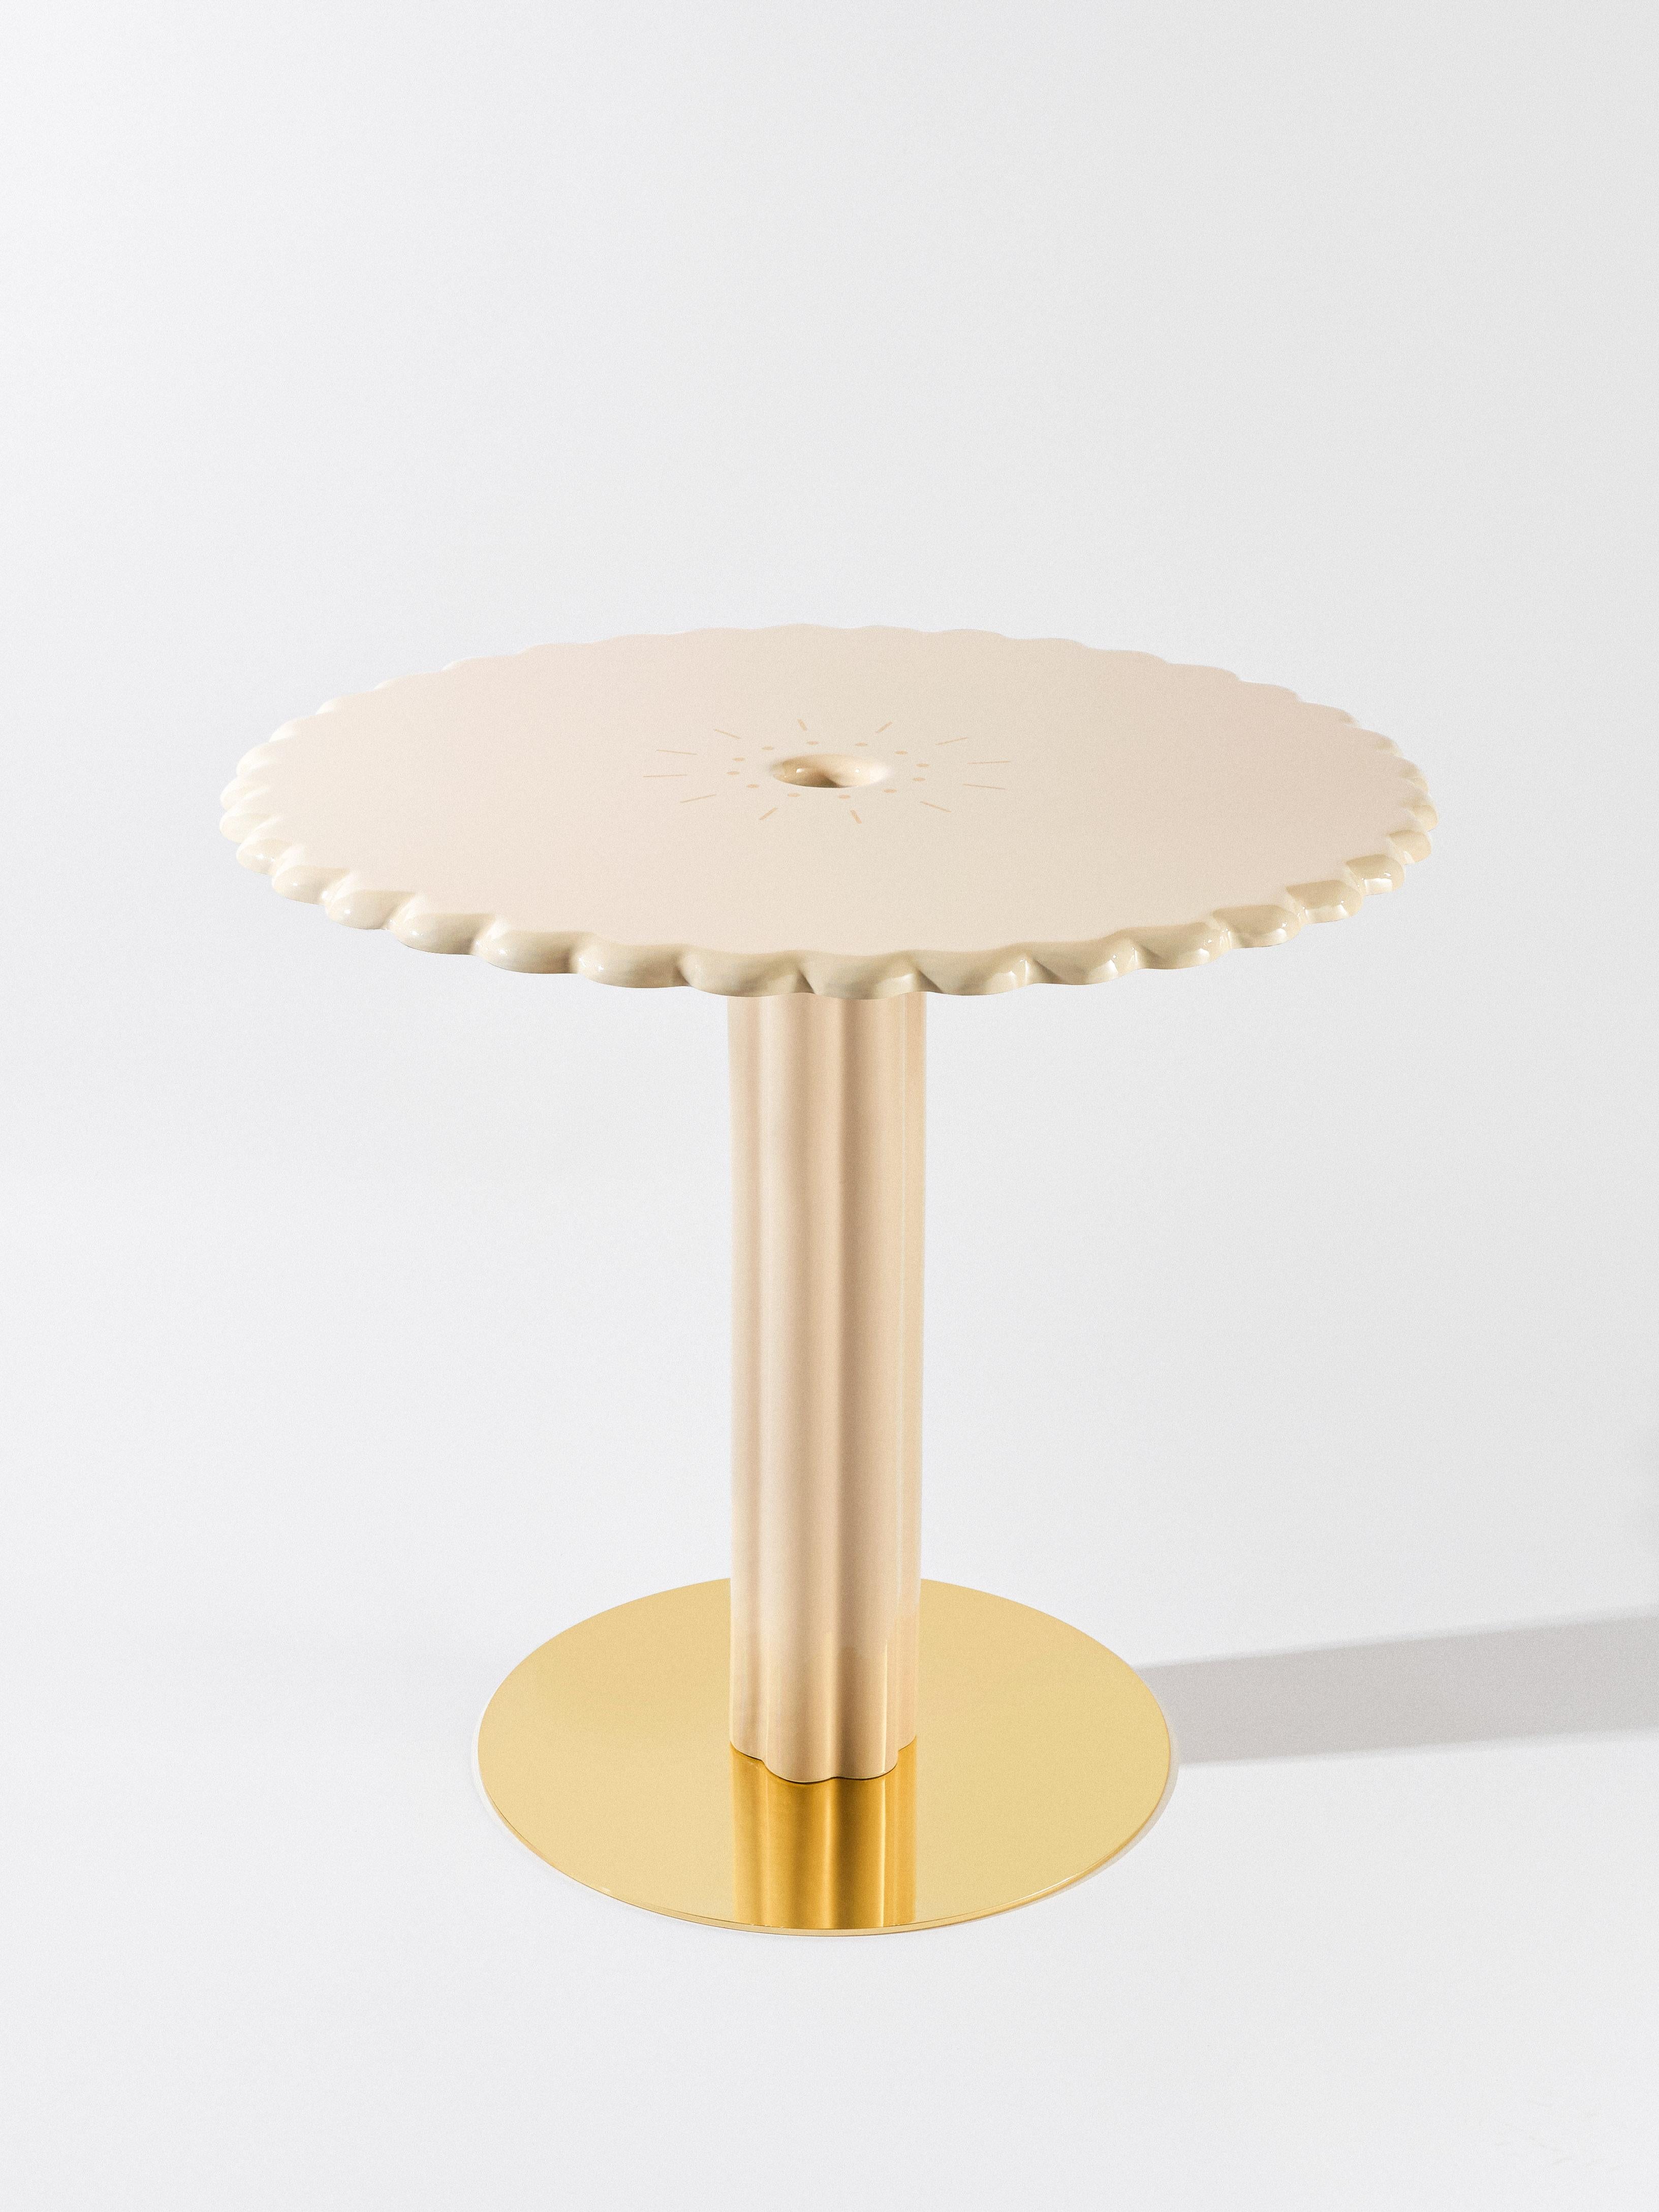 ‘Patisserie’ Lavastone & Ceramic table by Studio Yellowdot In New Condition For Sale In Esentepe, 34